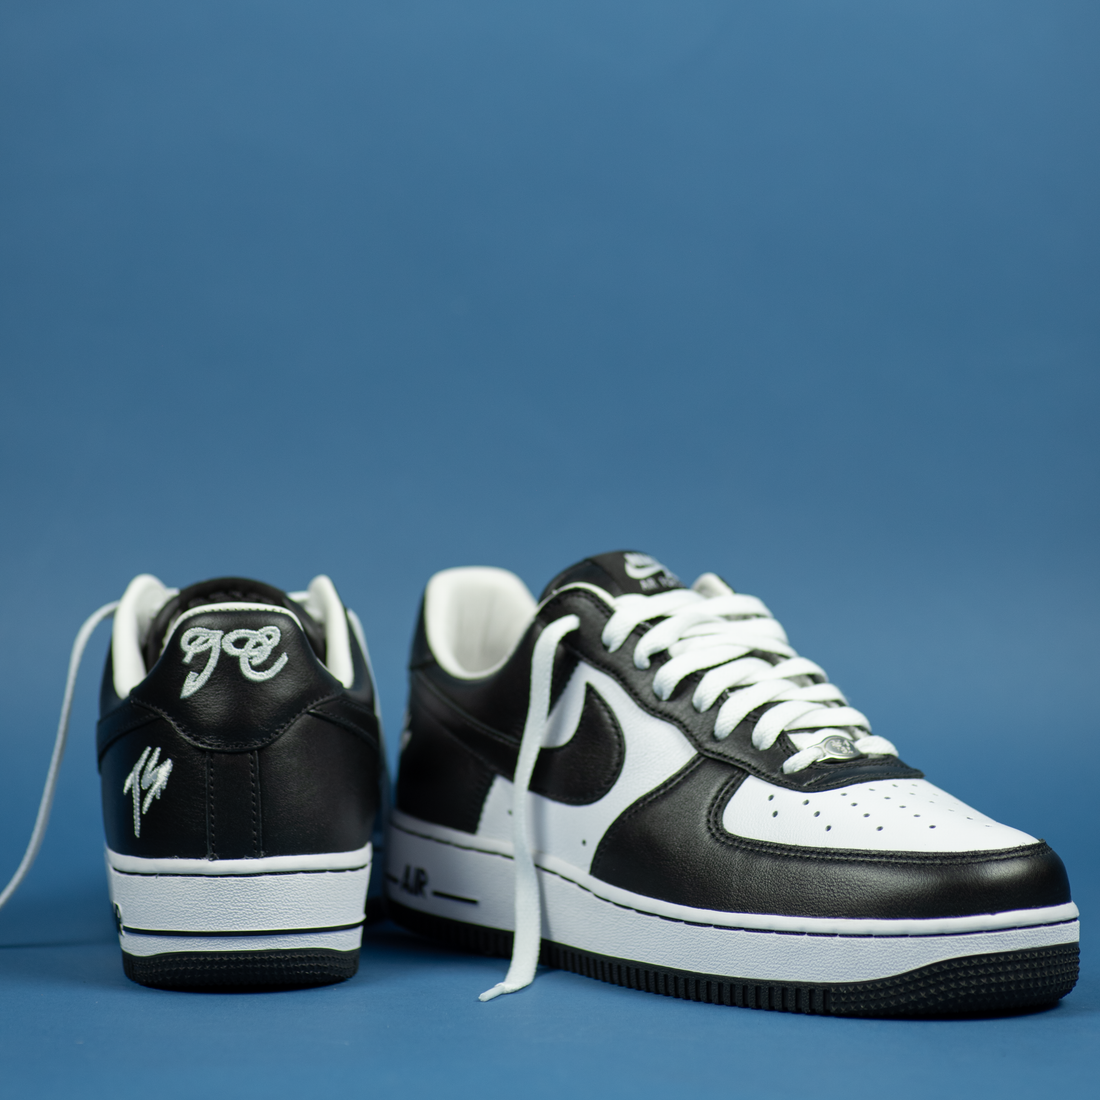 AIR FORCE ONE X TERROR SQUAD 'BLACKOUT'